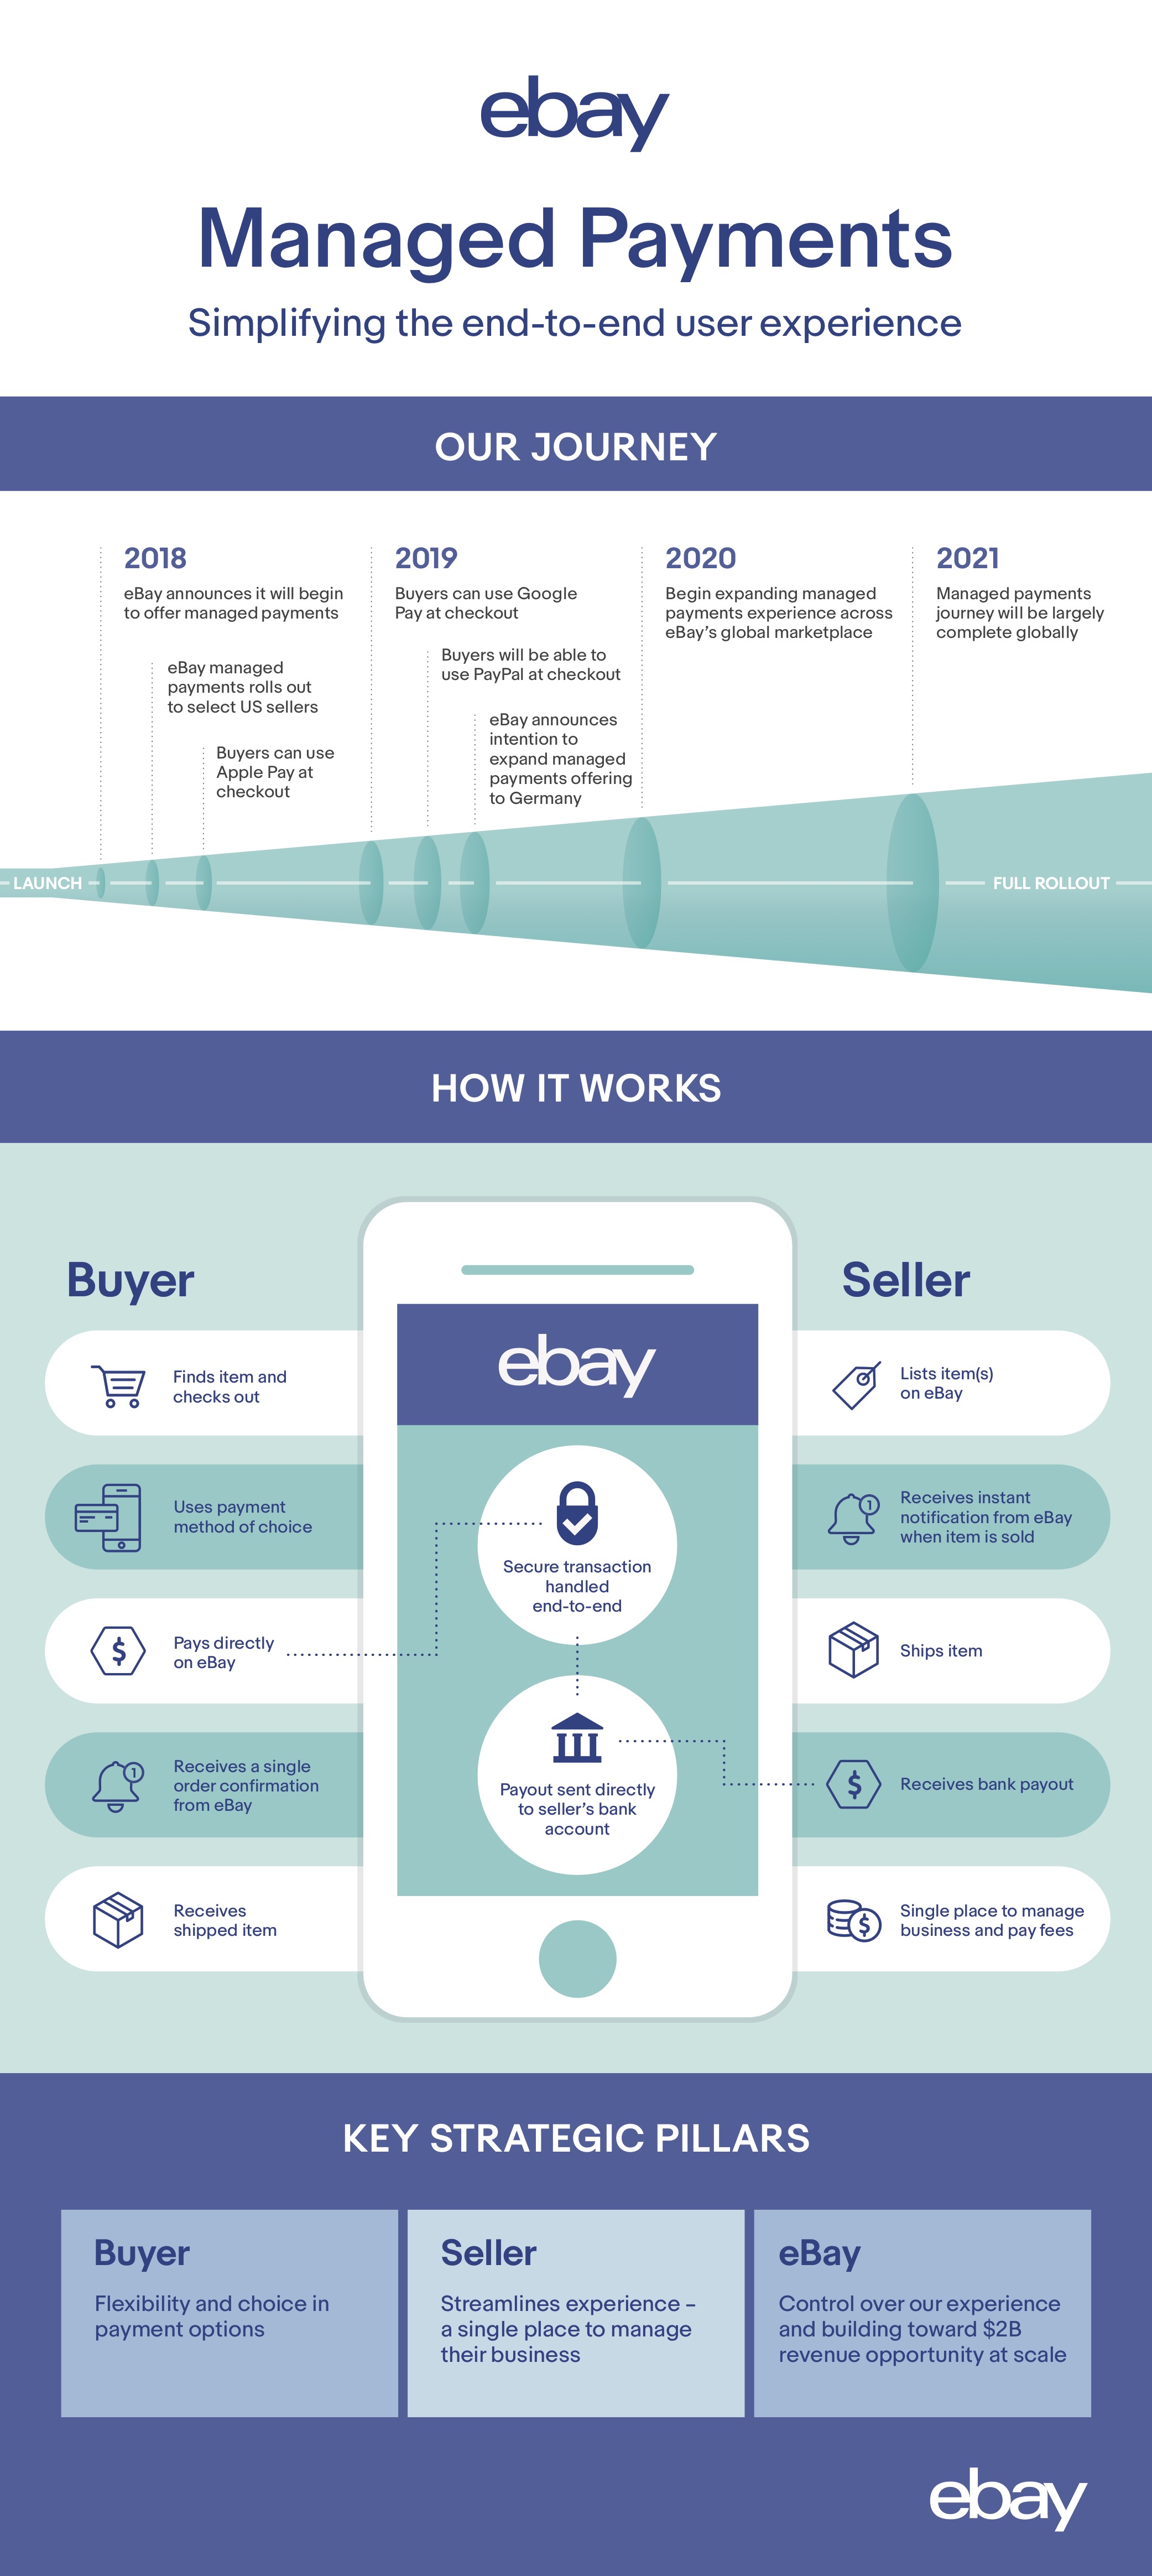 Automate Your eBay Sales with Managed Payments